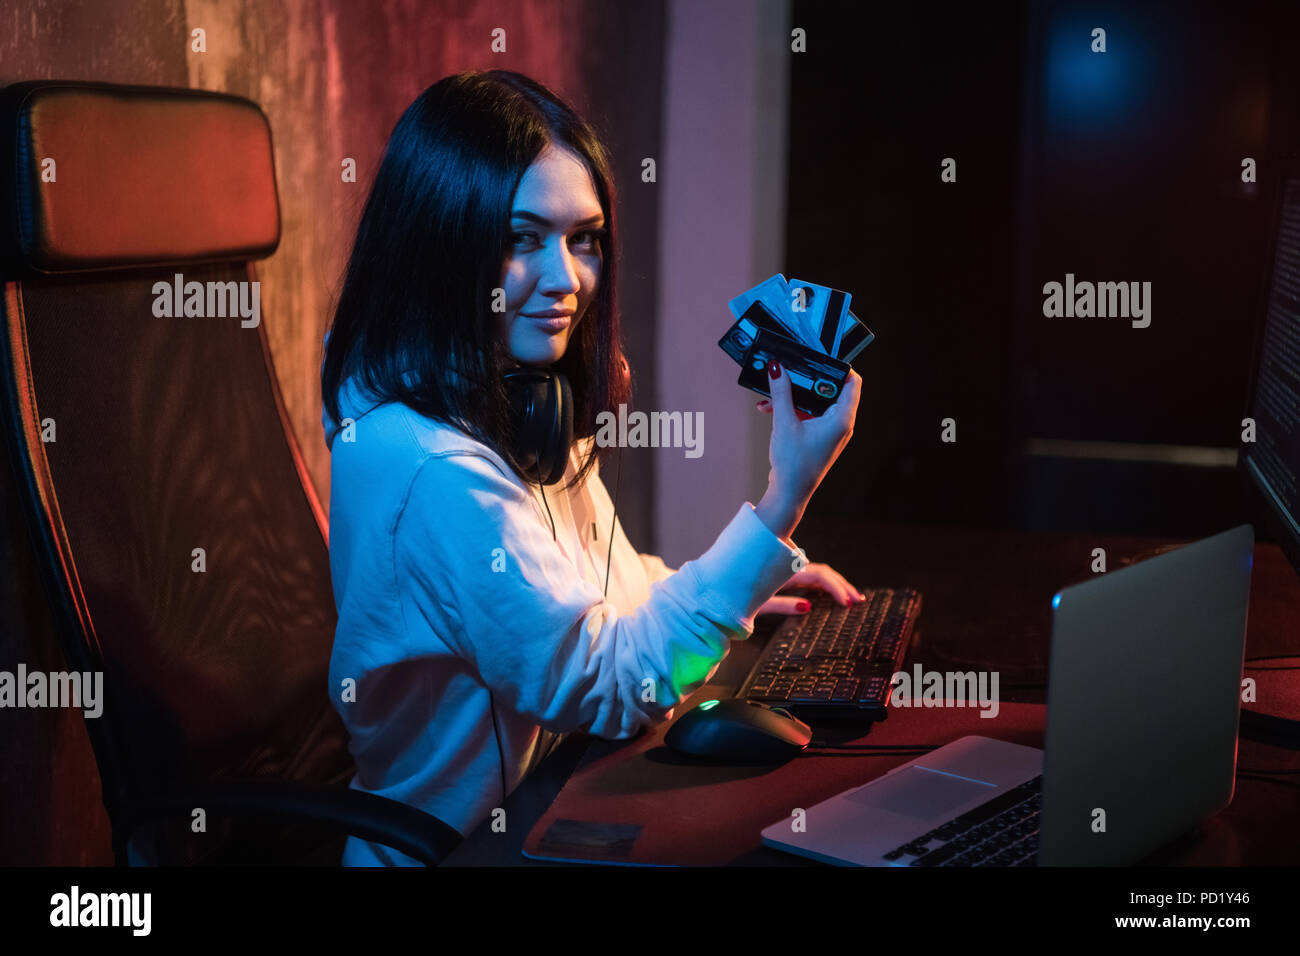 young teenager hacker girl in hoodie holding credit card violating private password holding credit card in cybercrime and cyber crime concept and internet information security concept Stock Photo